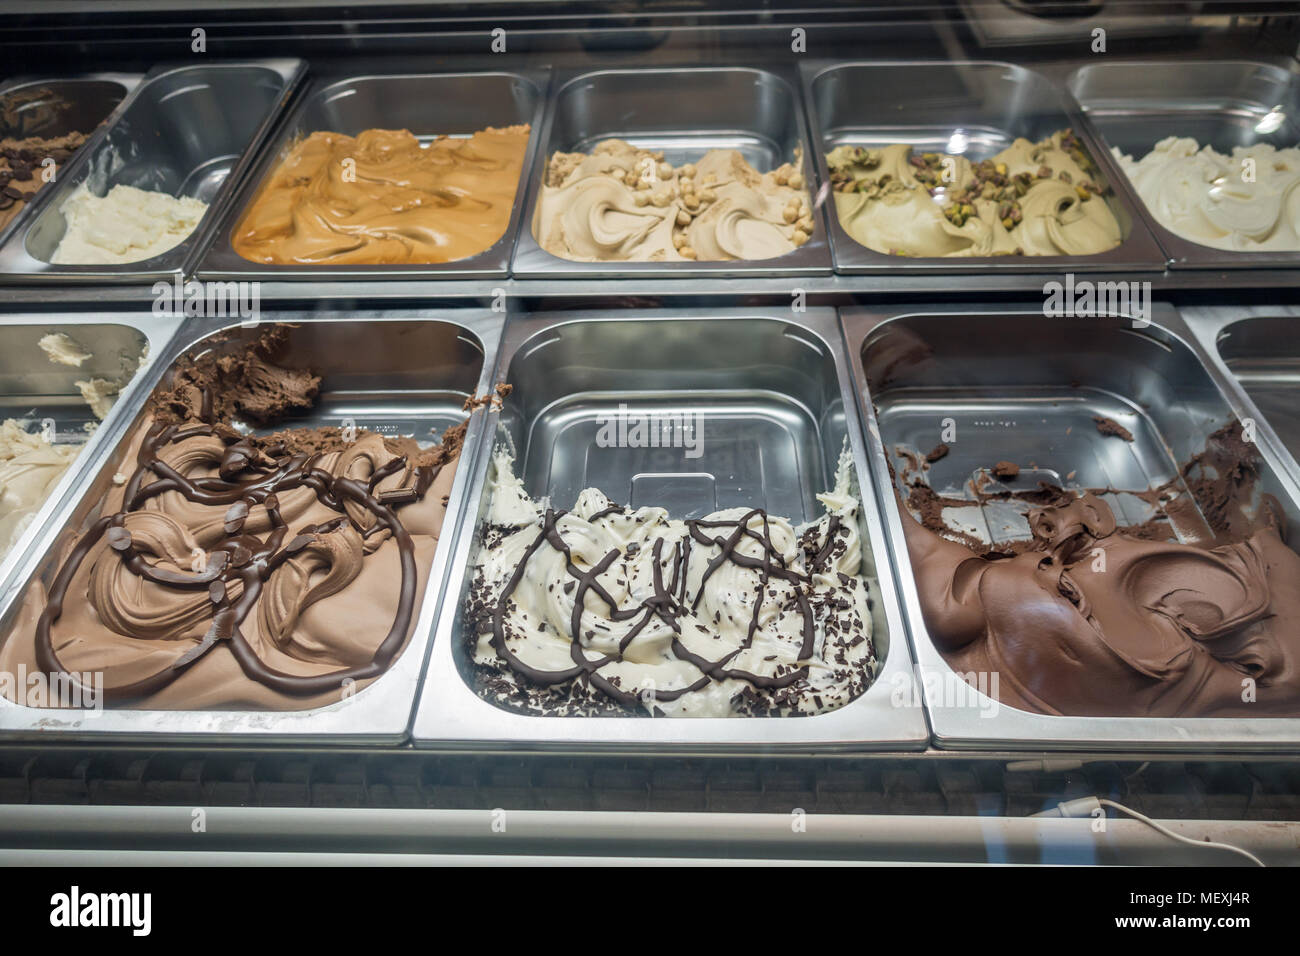 Trays containing different flavours of ice cream. Stock Photo